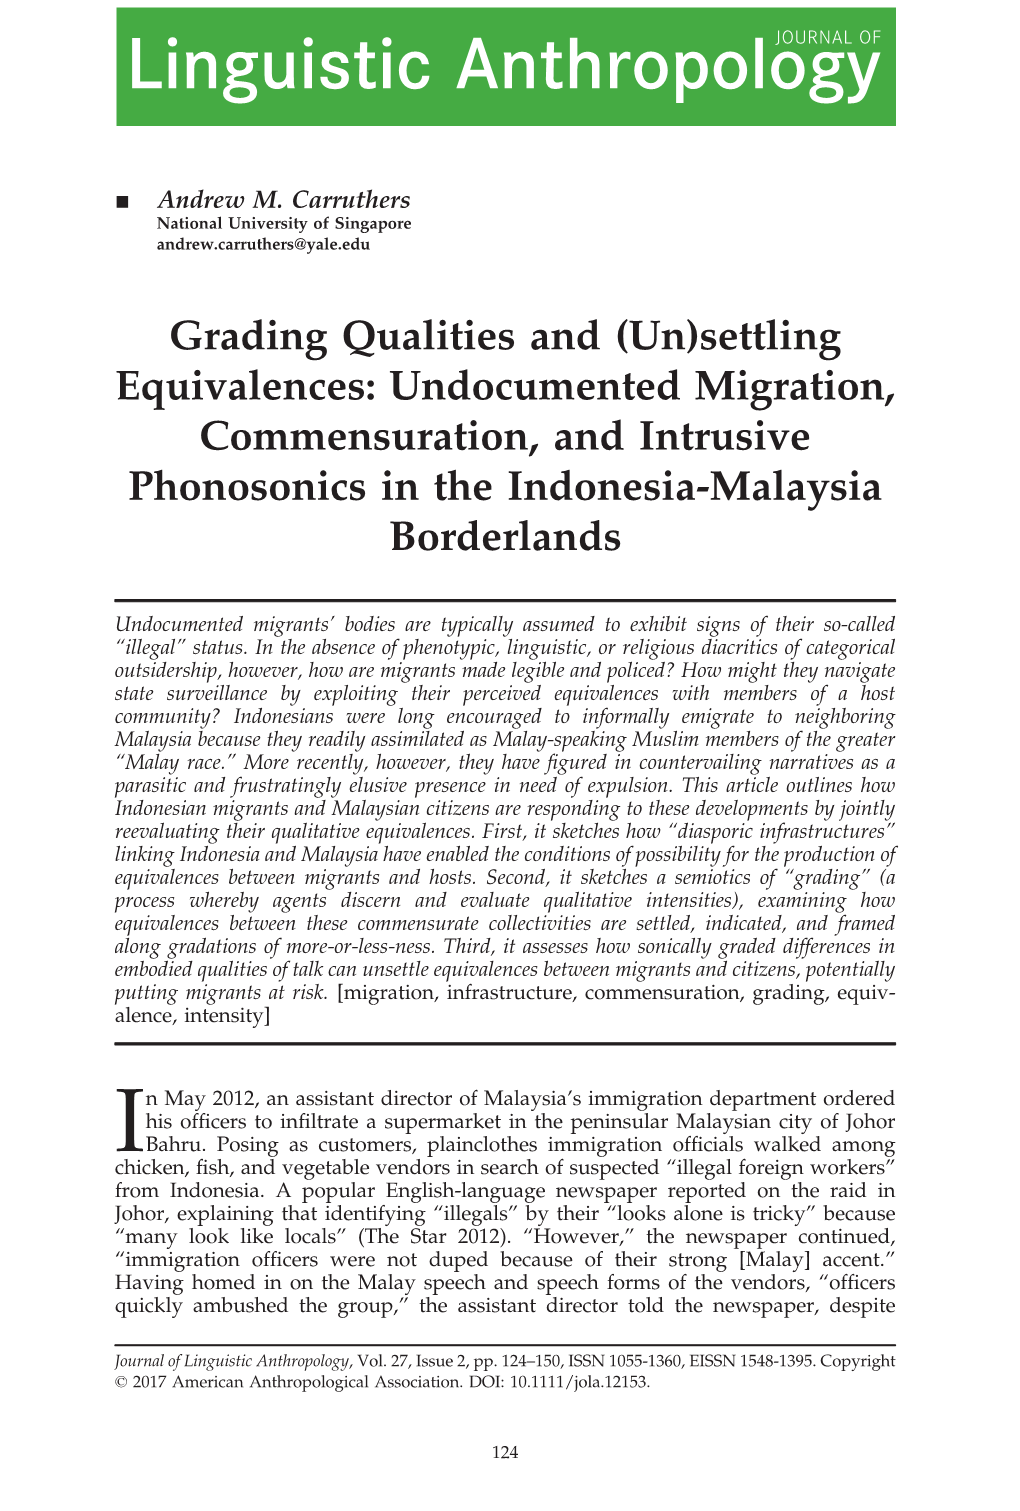 Grading Qualities and (Un)Settling Equivalences: Undocumented Migration, Commensuration, and Intrusive Phonosonics in the Indonesia-Malaysia Borderlands